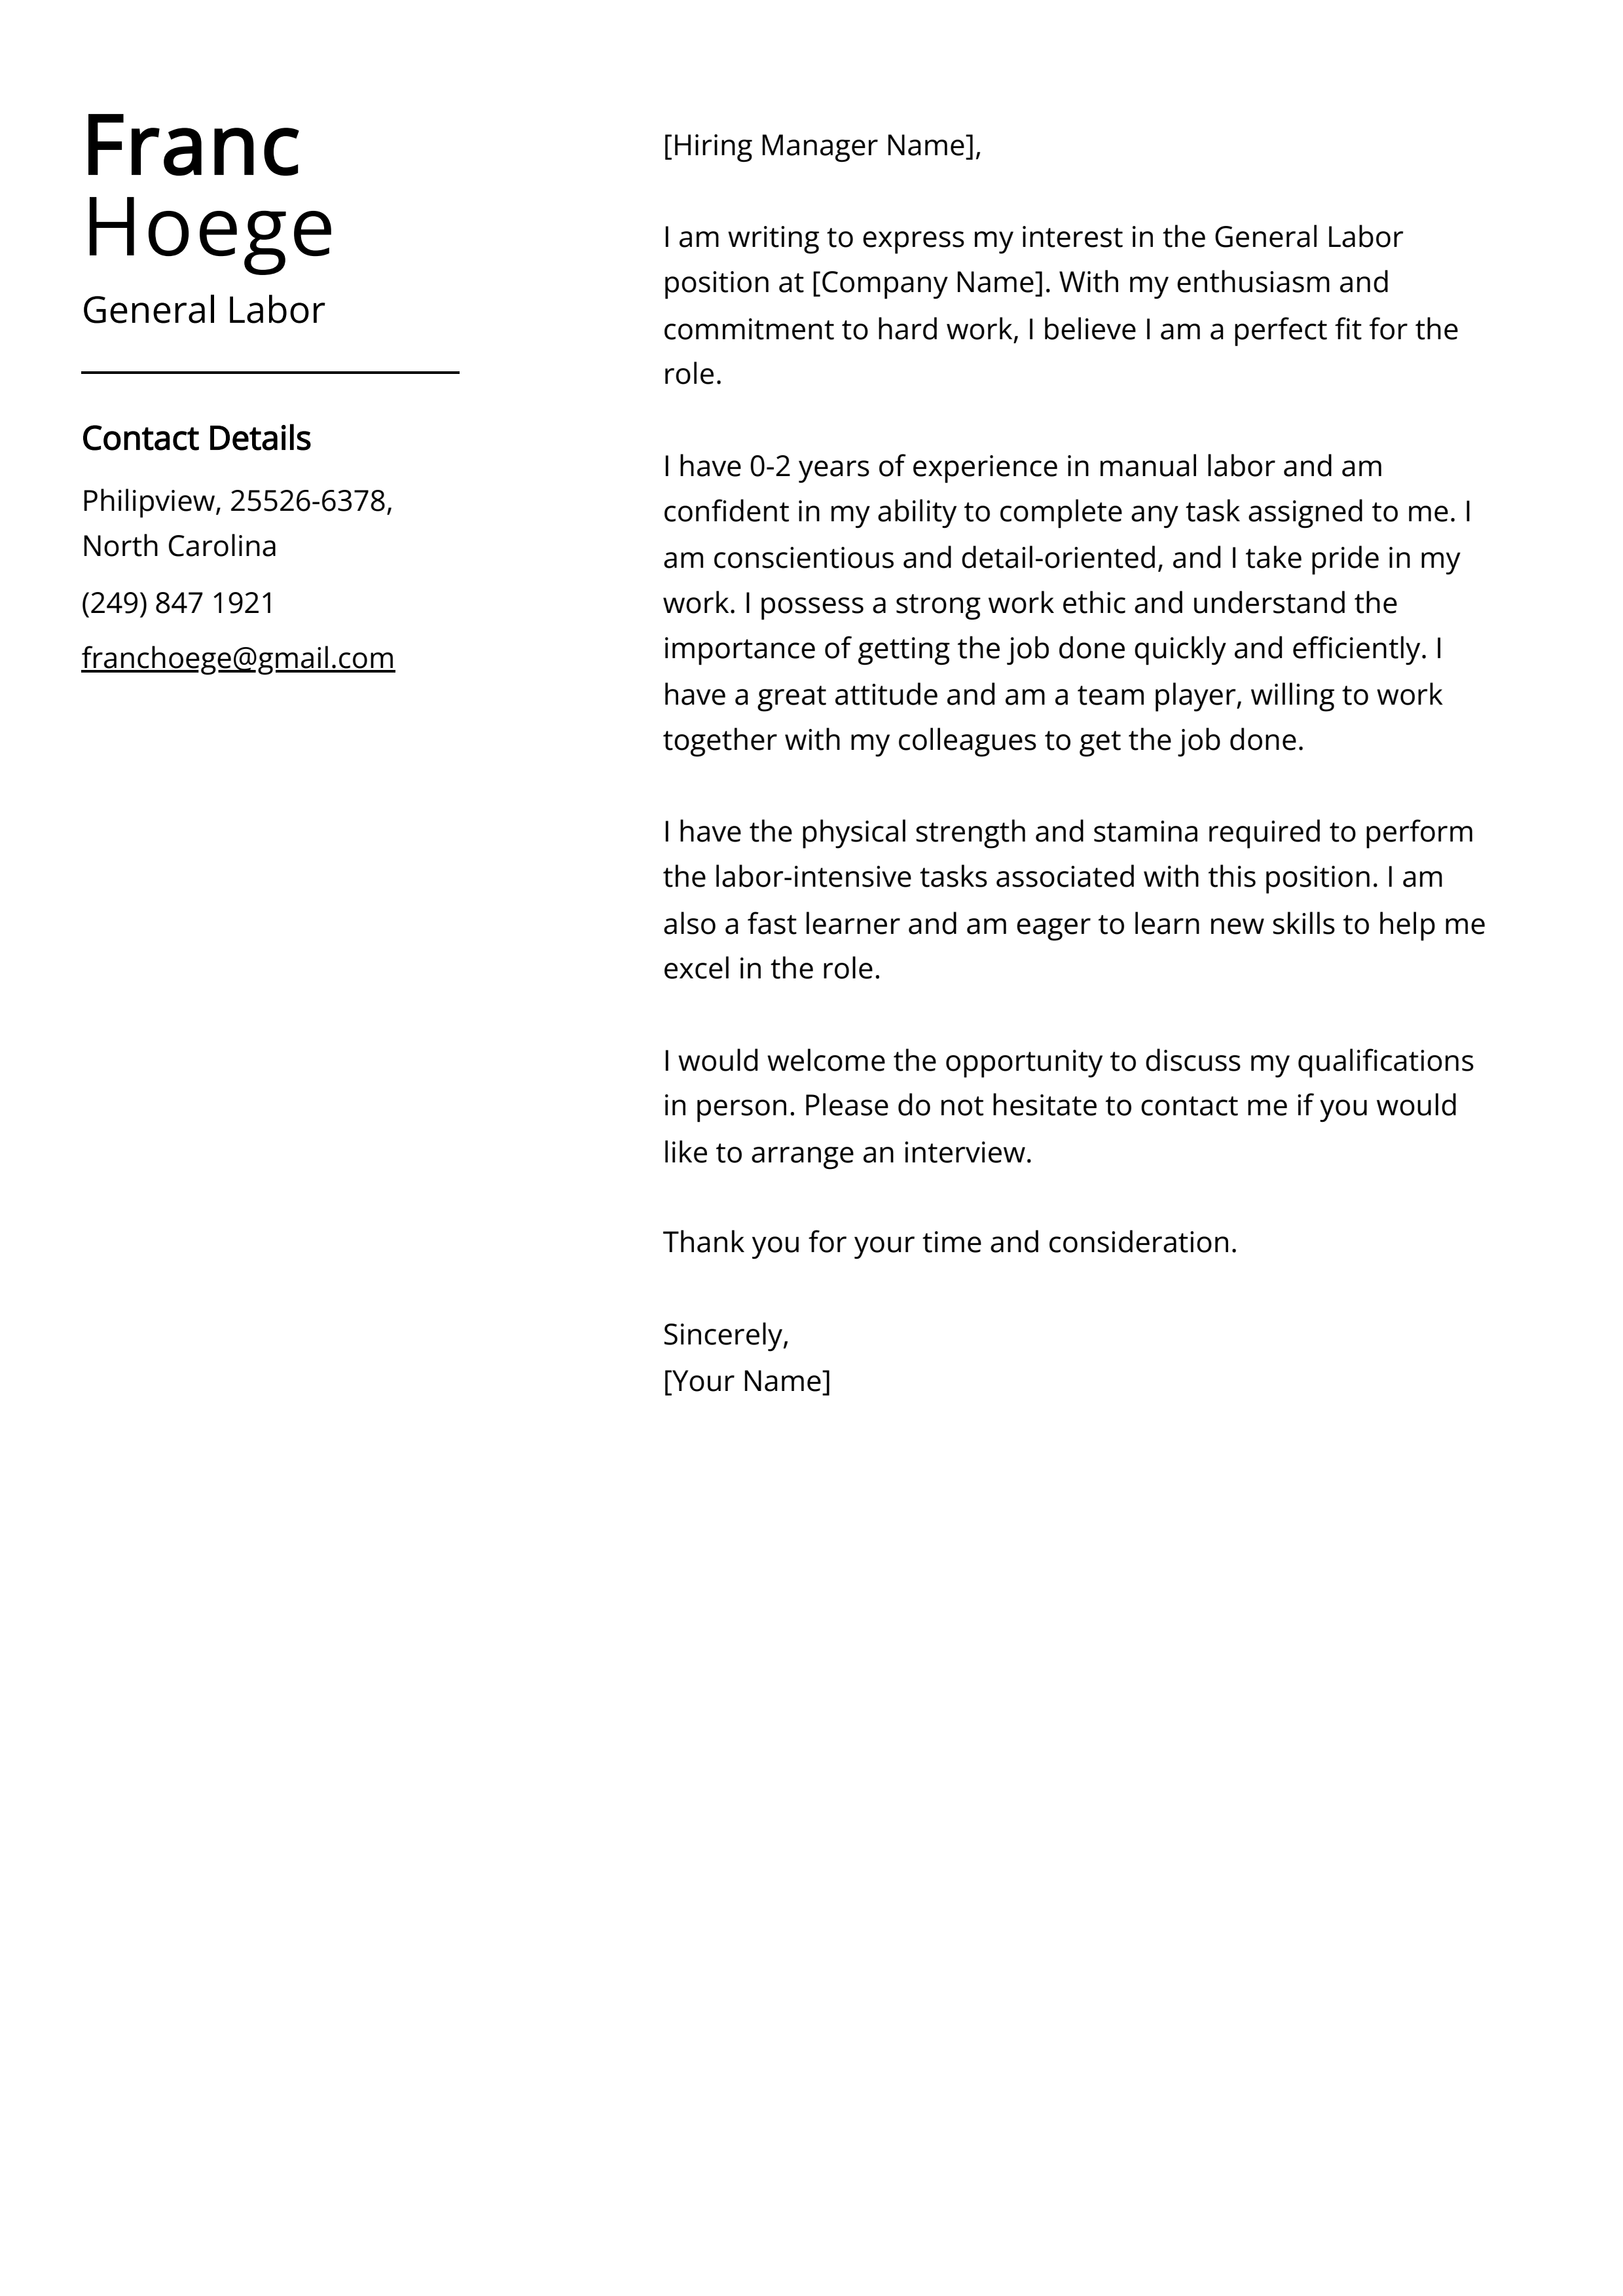 General Labor Cover Letter Example